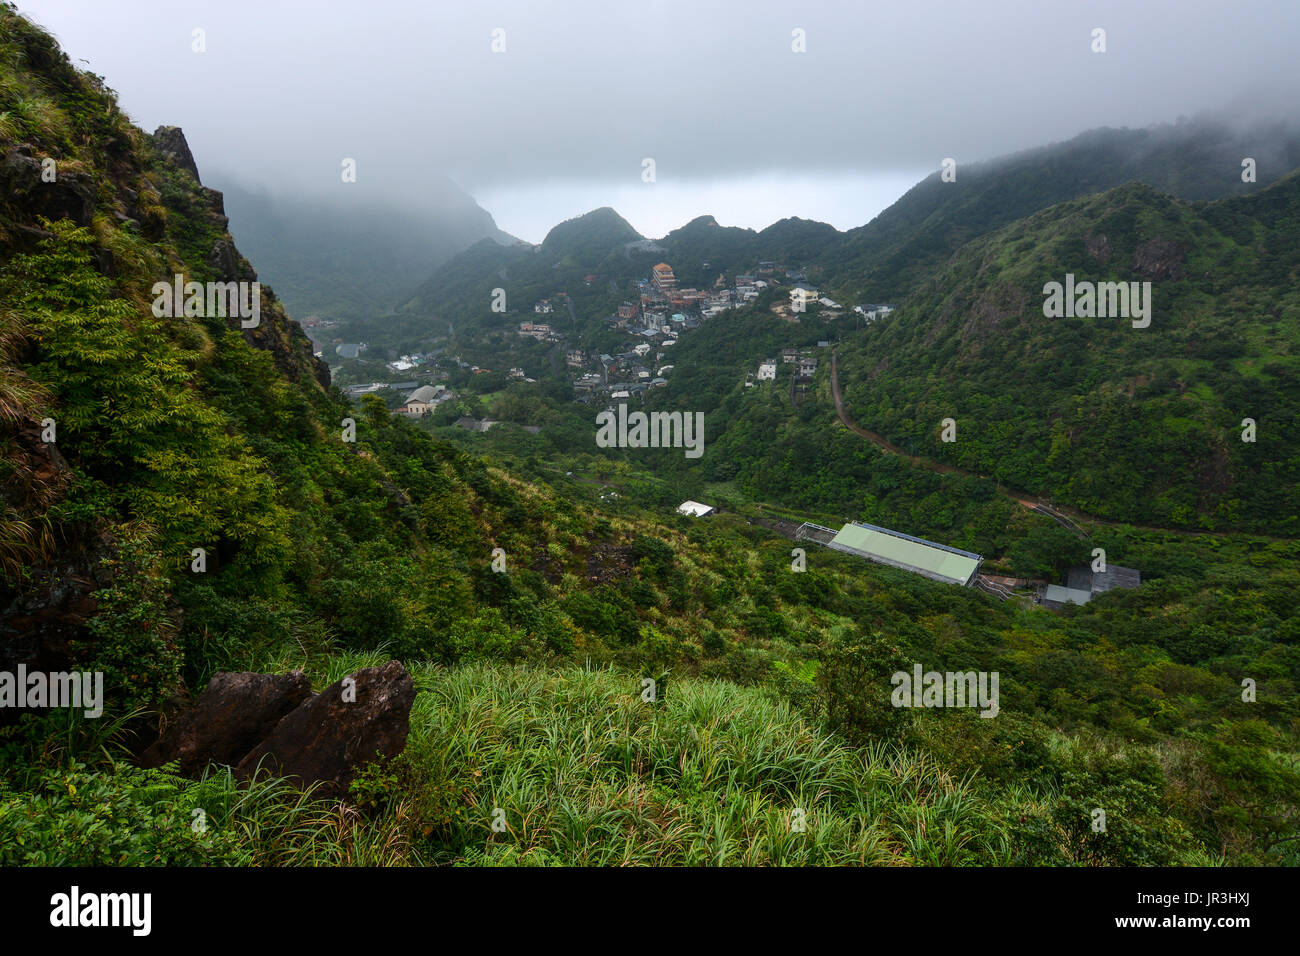 View over the Gold Ecological Park in Jiufen, Taiwan from a mountain hiking path overlook Stock Photo